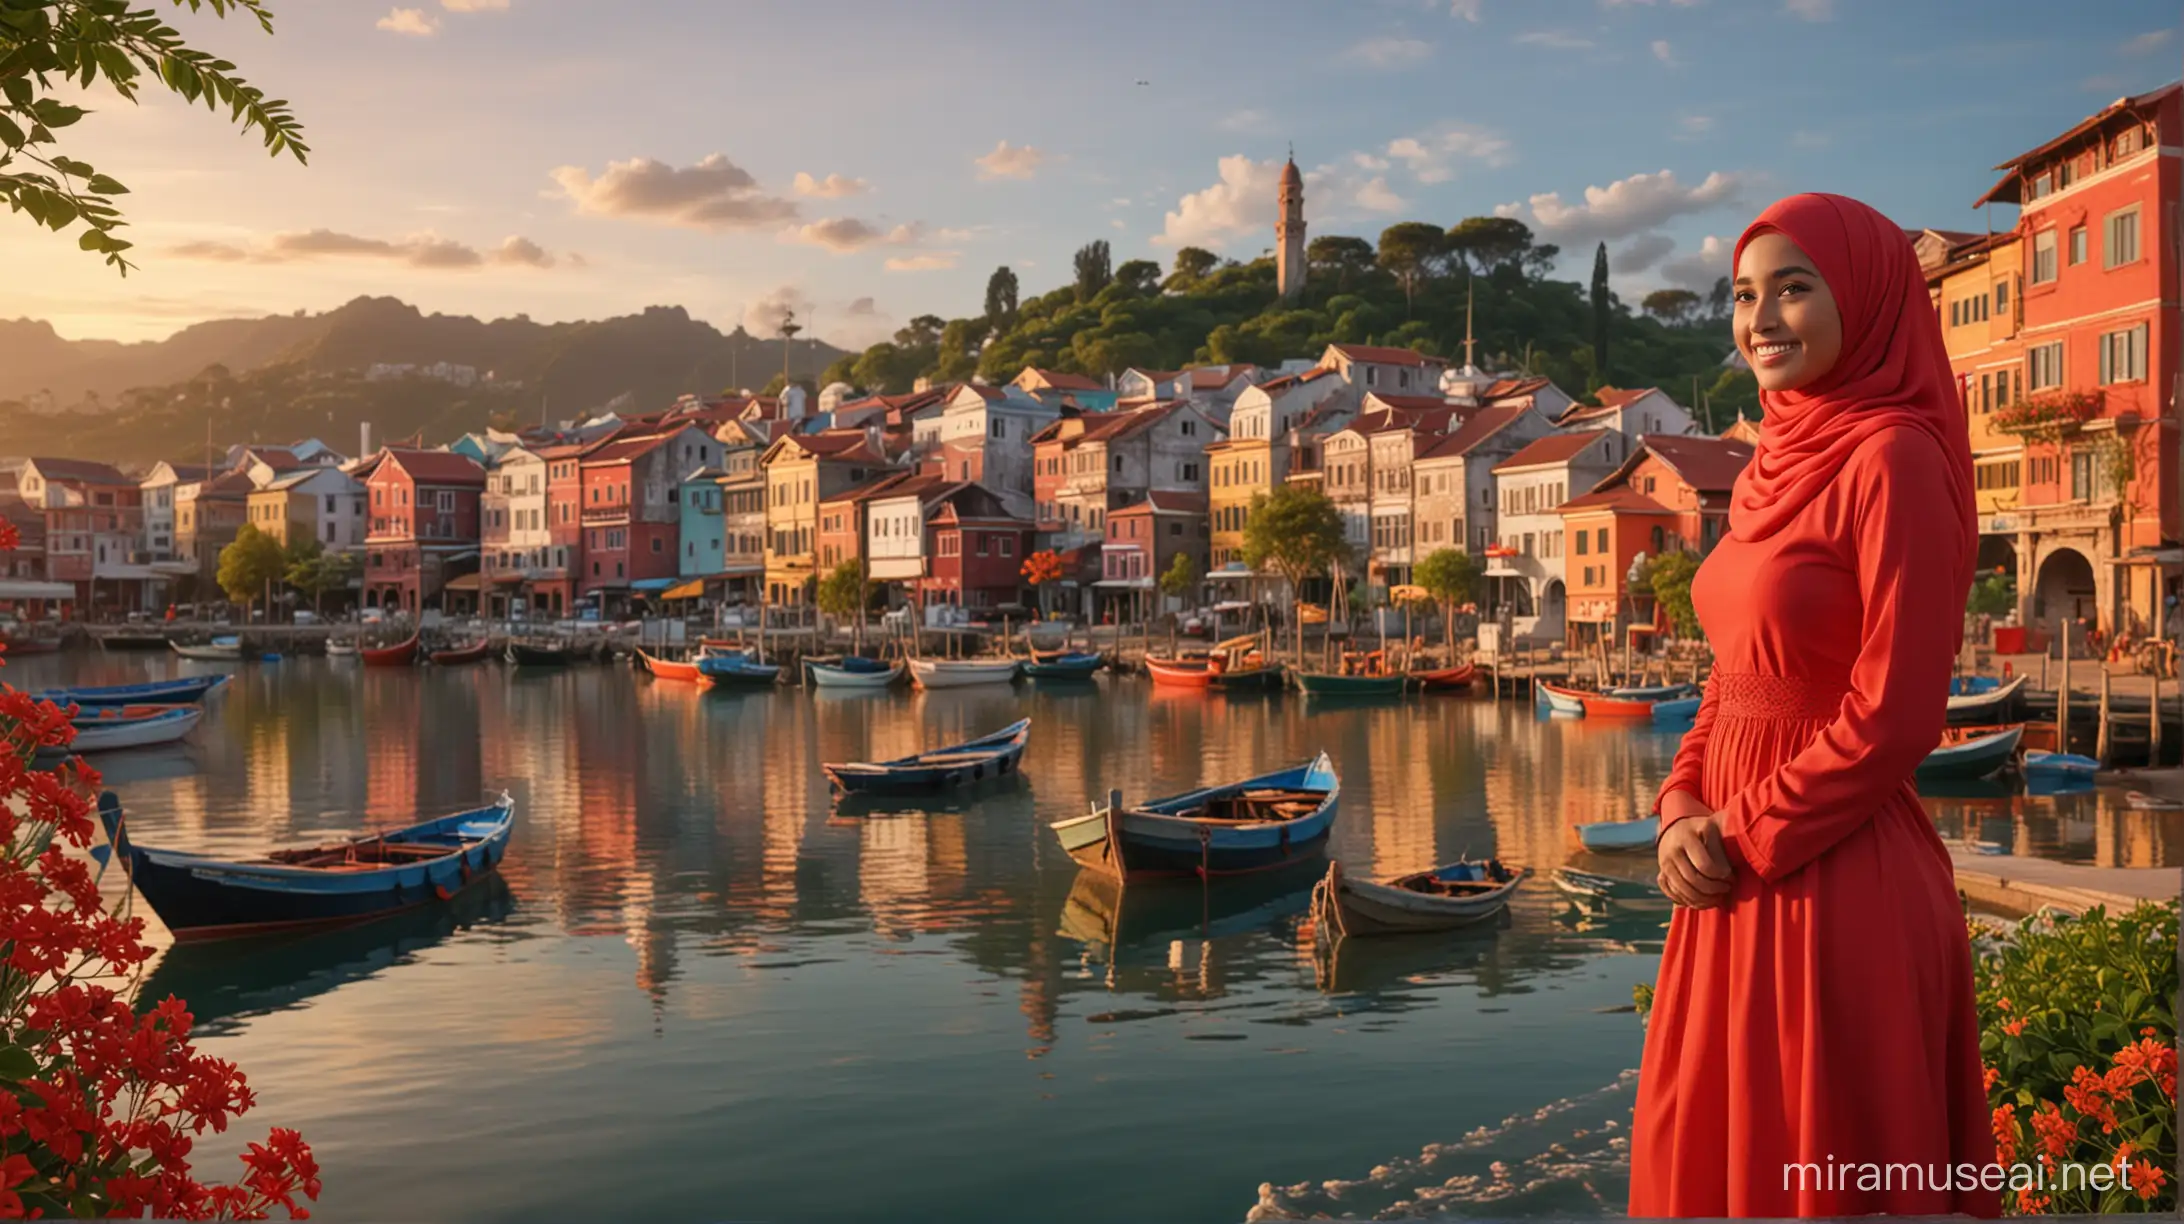 Tranquil Sunset Coastal Scene with Smiling Malay Woman in Red Dress